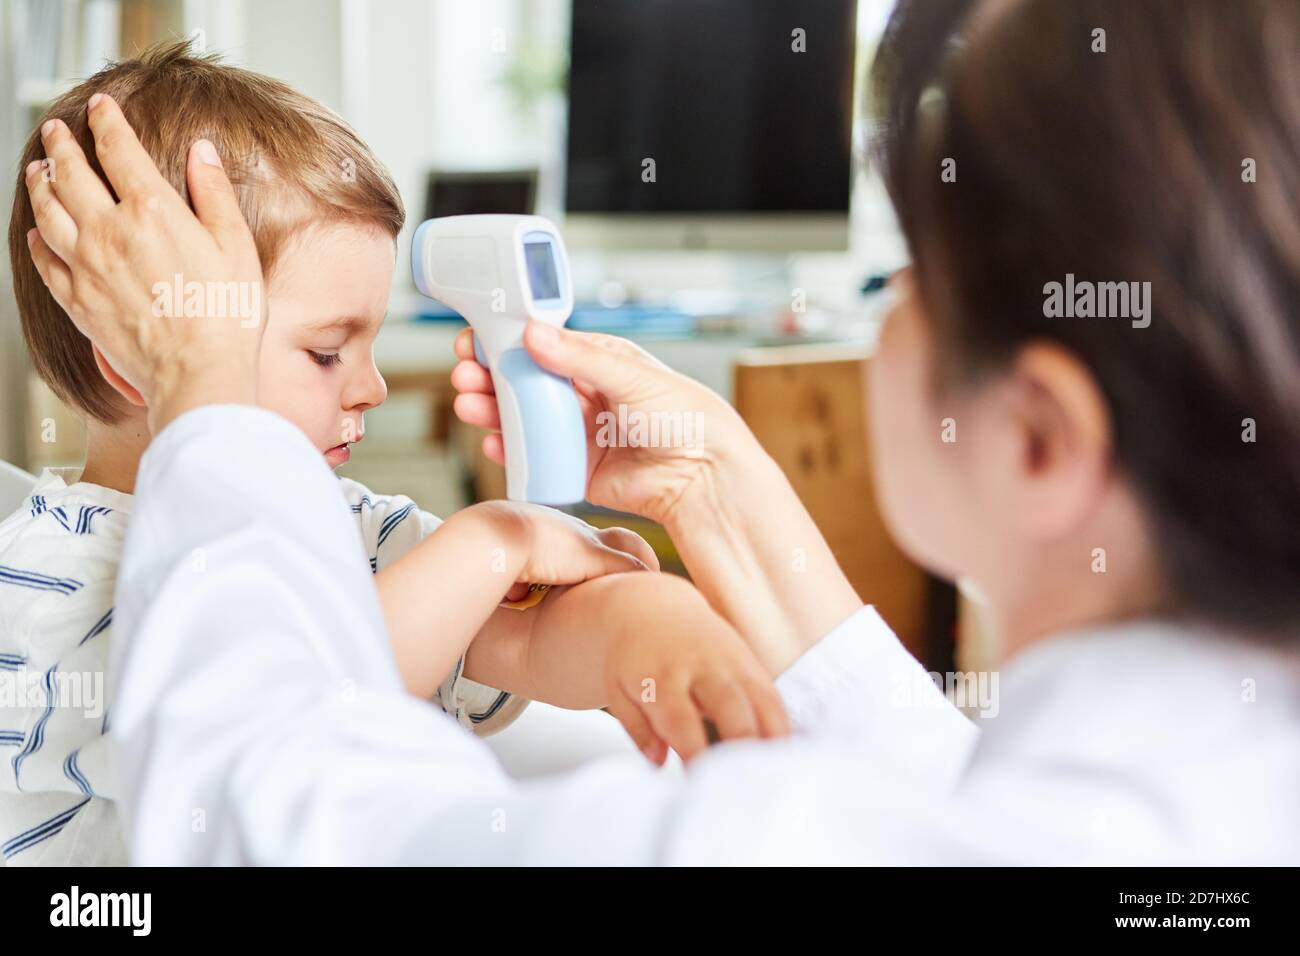 Pediatrician measuring a fever with a forehead thermometer on a child Stock Photo